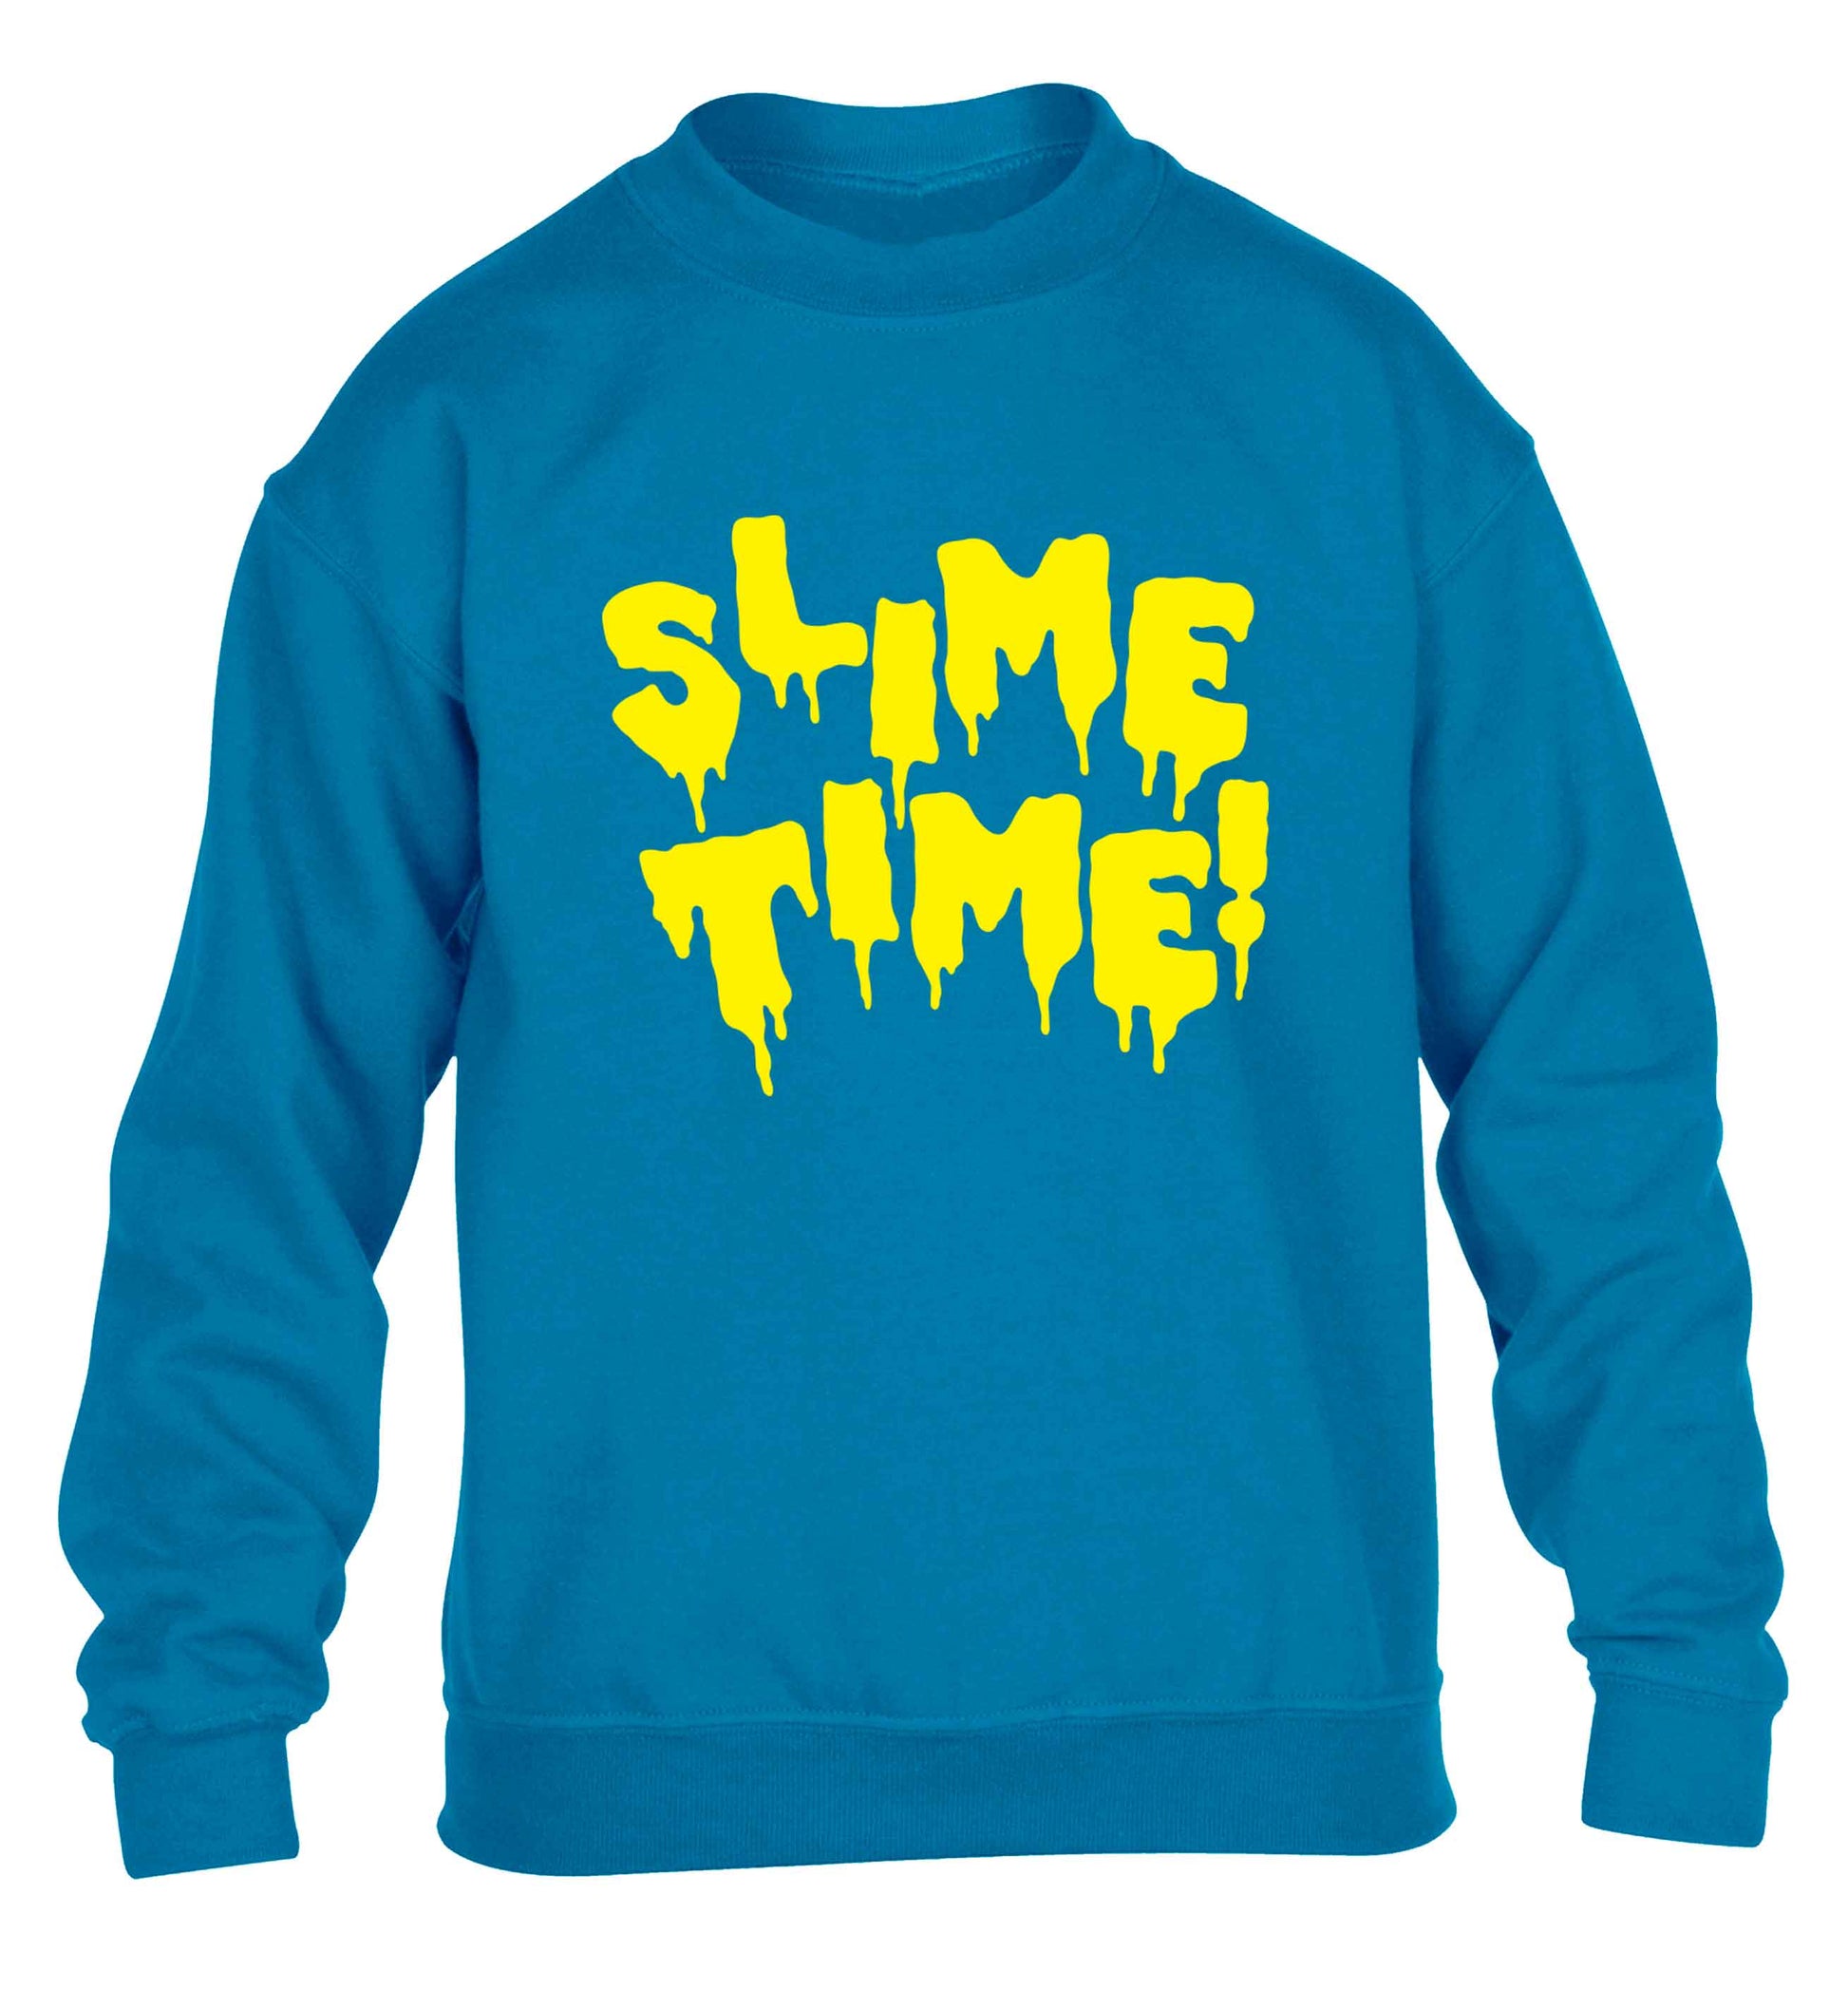 Neon yellow slime time children's blue sweater 12-13 Years